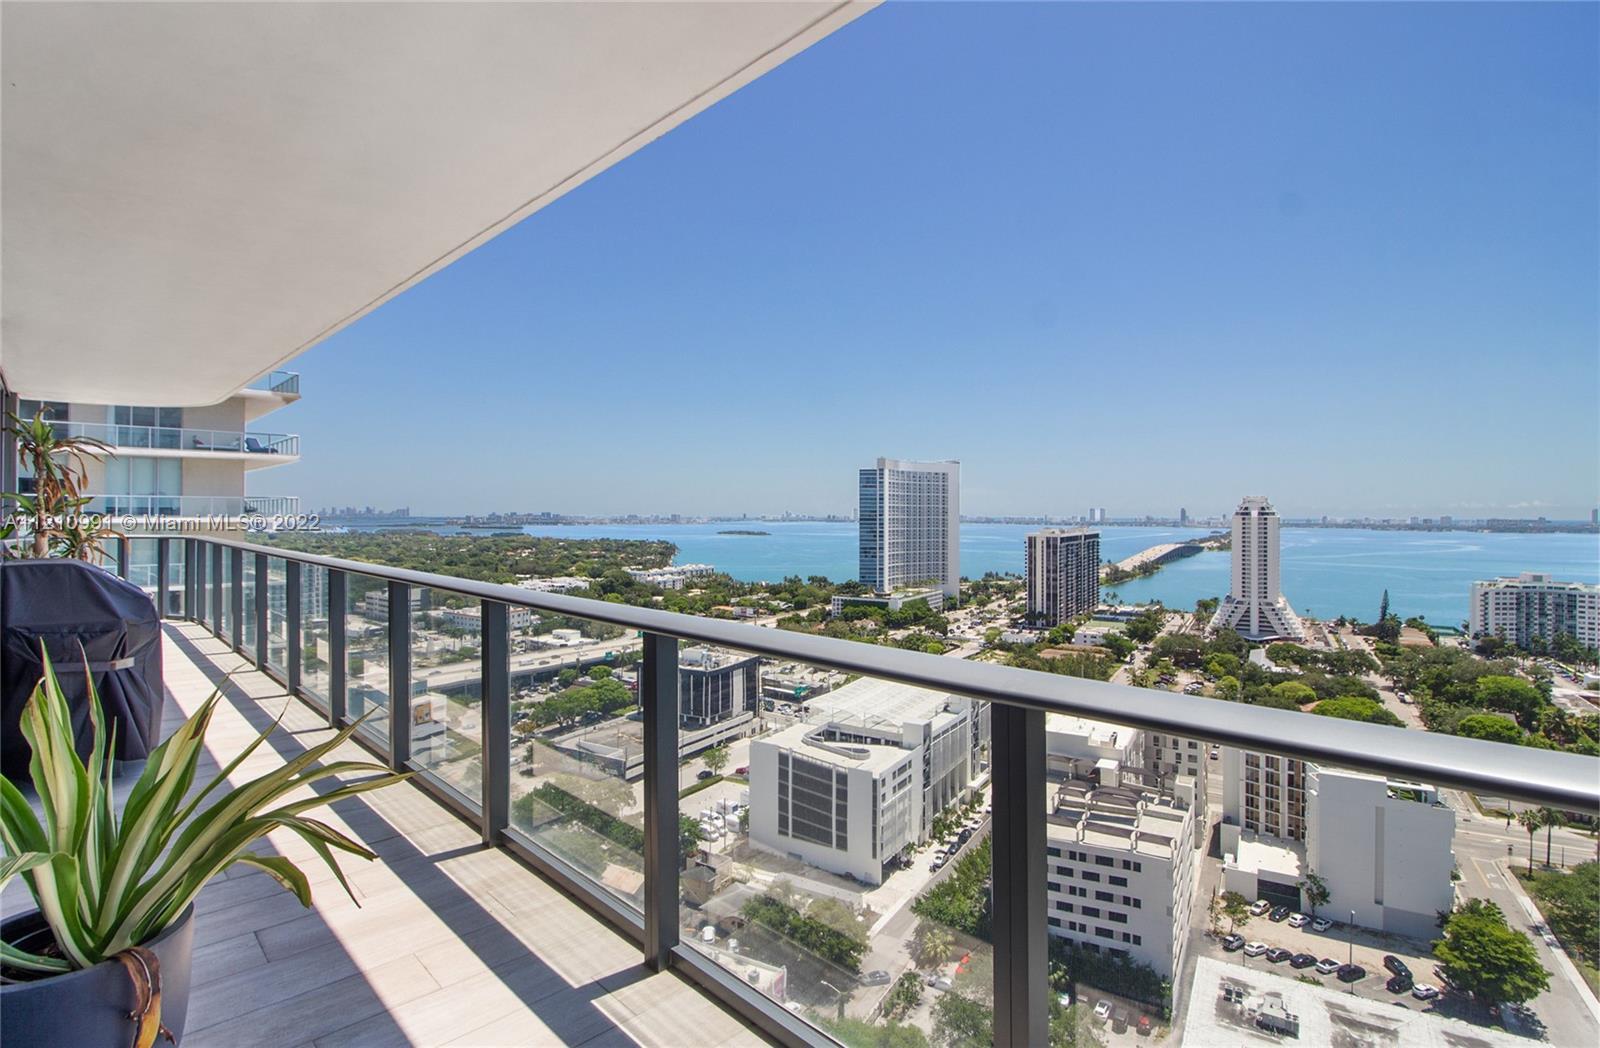 Amazing corner unit, with beautiful unobstructed views of Biscayne Bay. Open Floor plan design with 